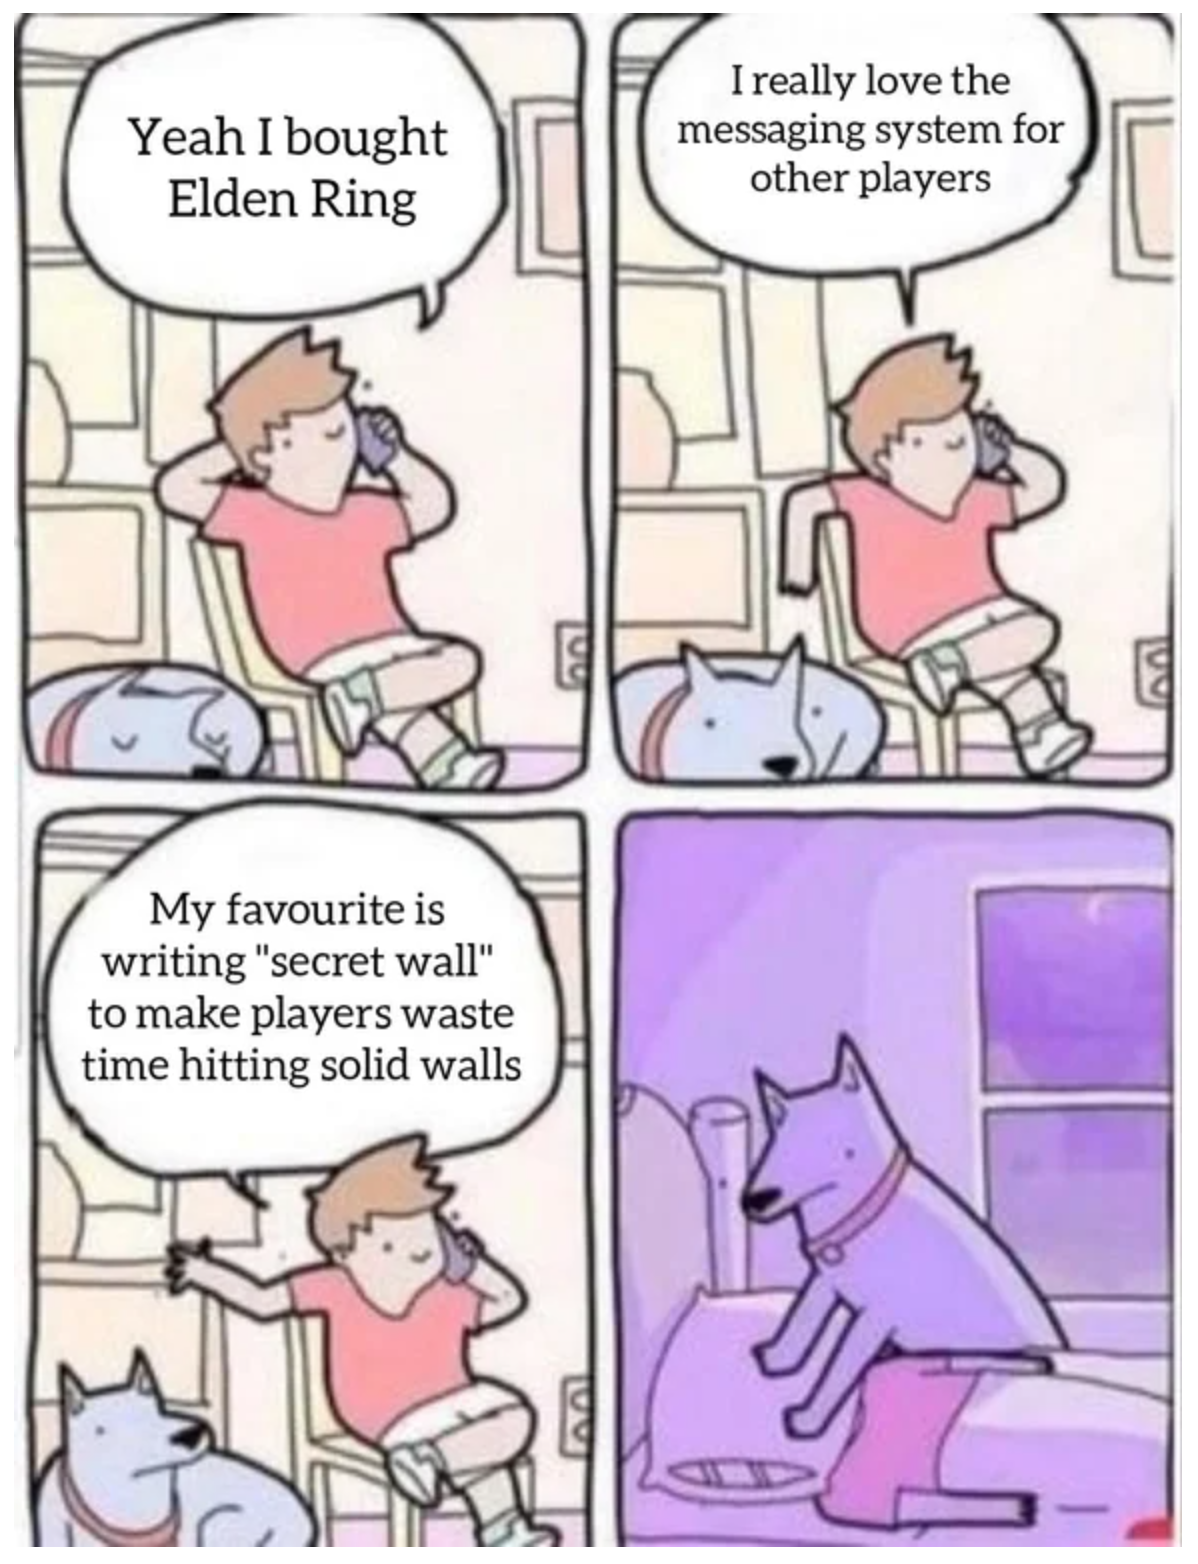 elden ring memes - libleft authleft - Yeah I bought Elden Ring I really love the messaging system for other players w My favourite is writing "secret wall" to make players waste time hitting solid walls na